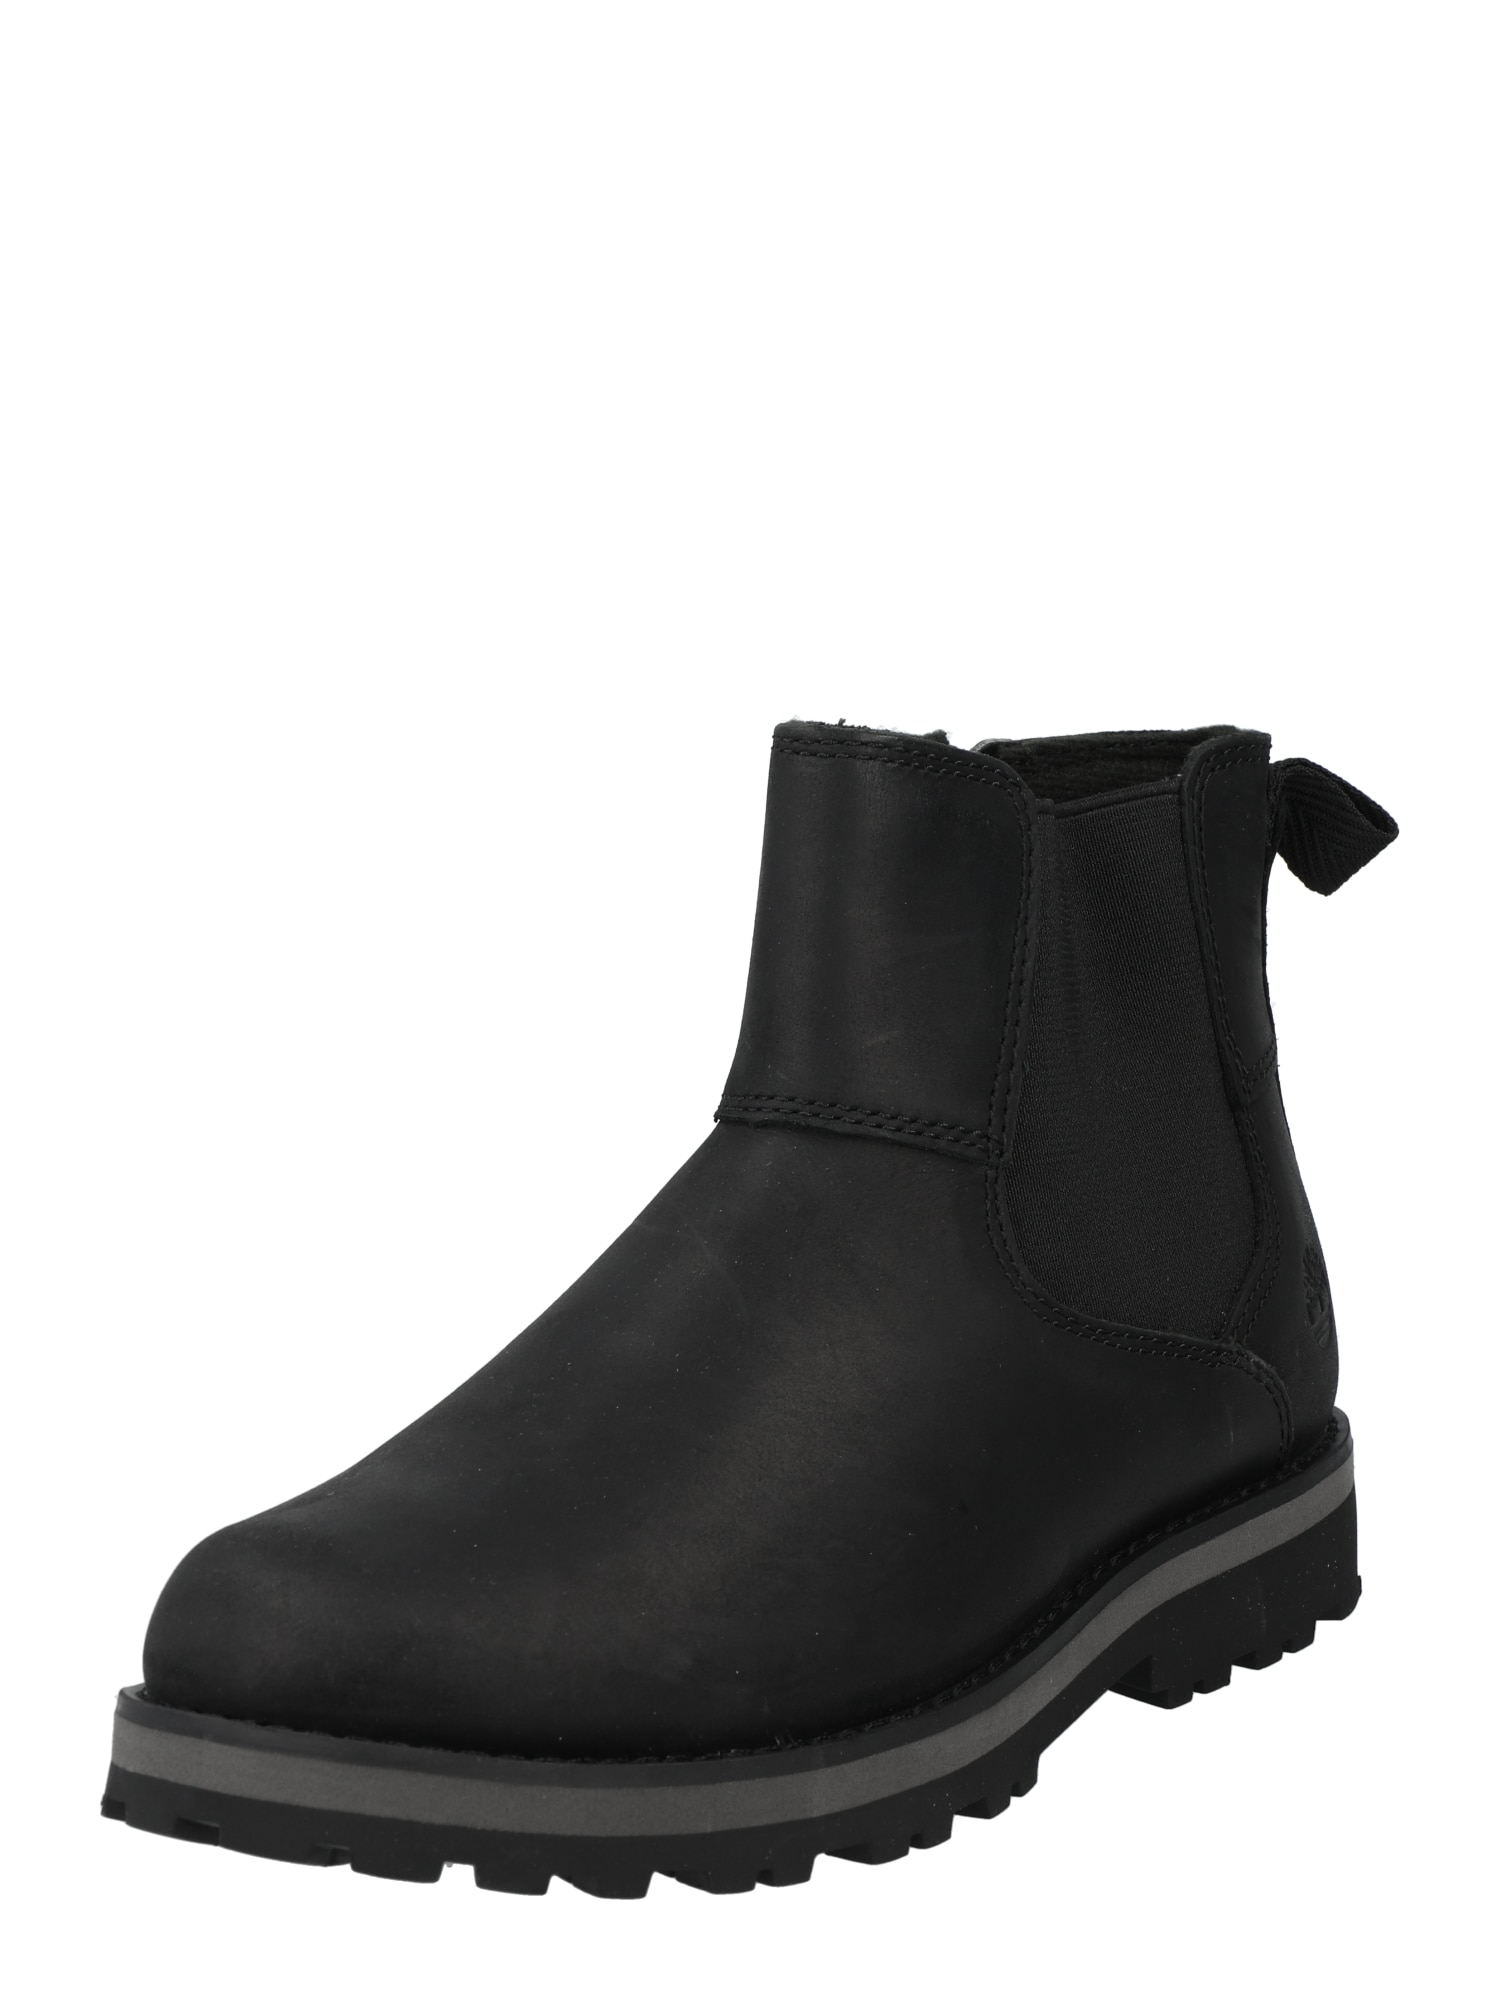 Chelsea Boots 'Courma' von Timberland